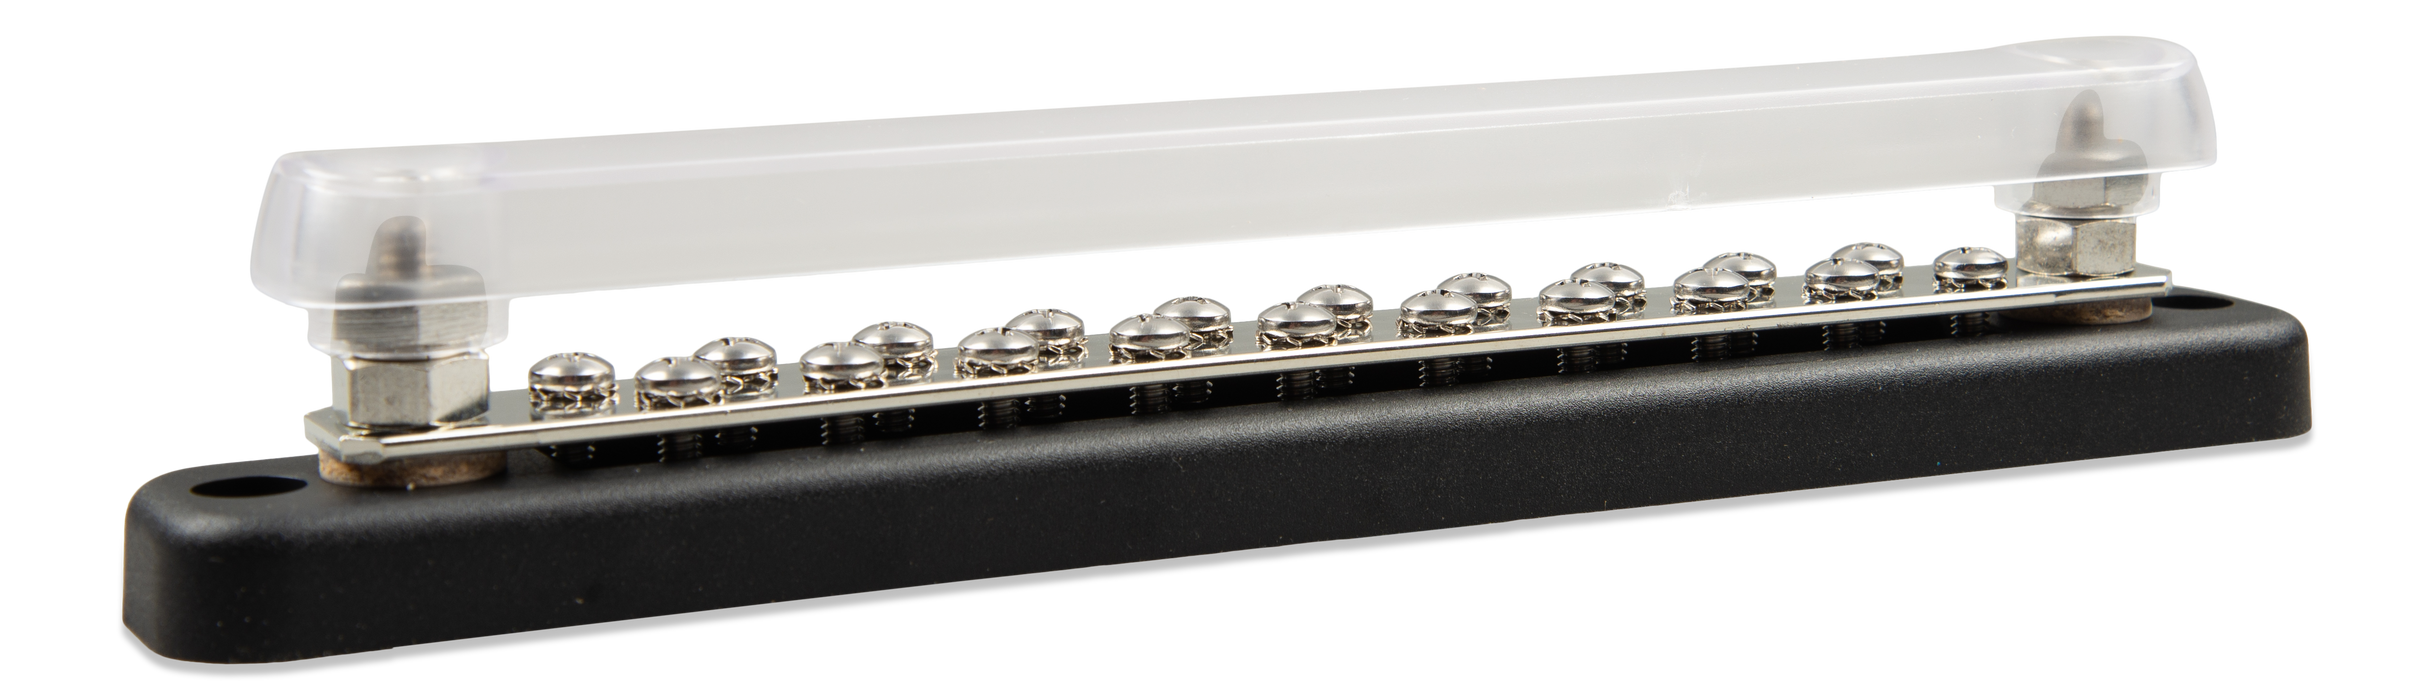 Victron Busbar 150A, 250A, 600A 20 point side view